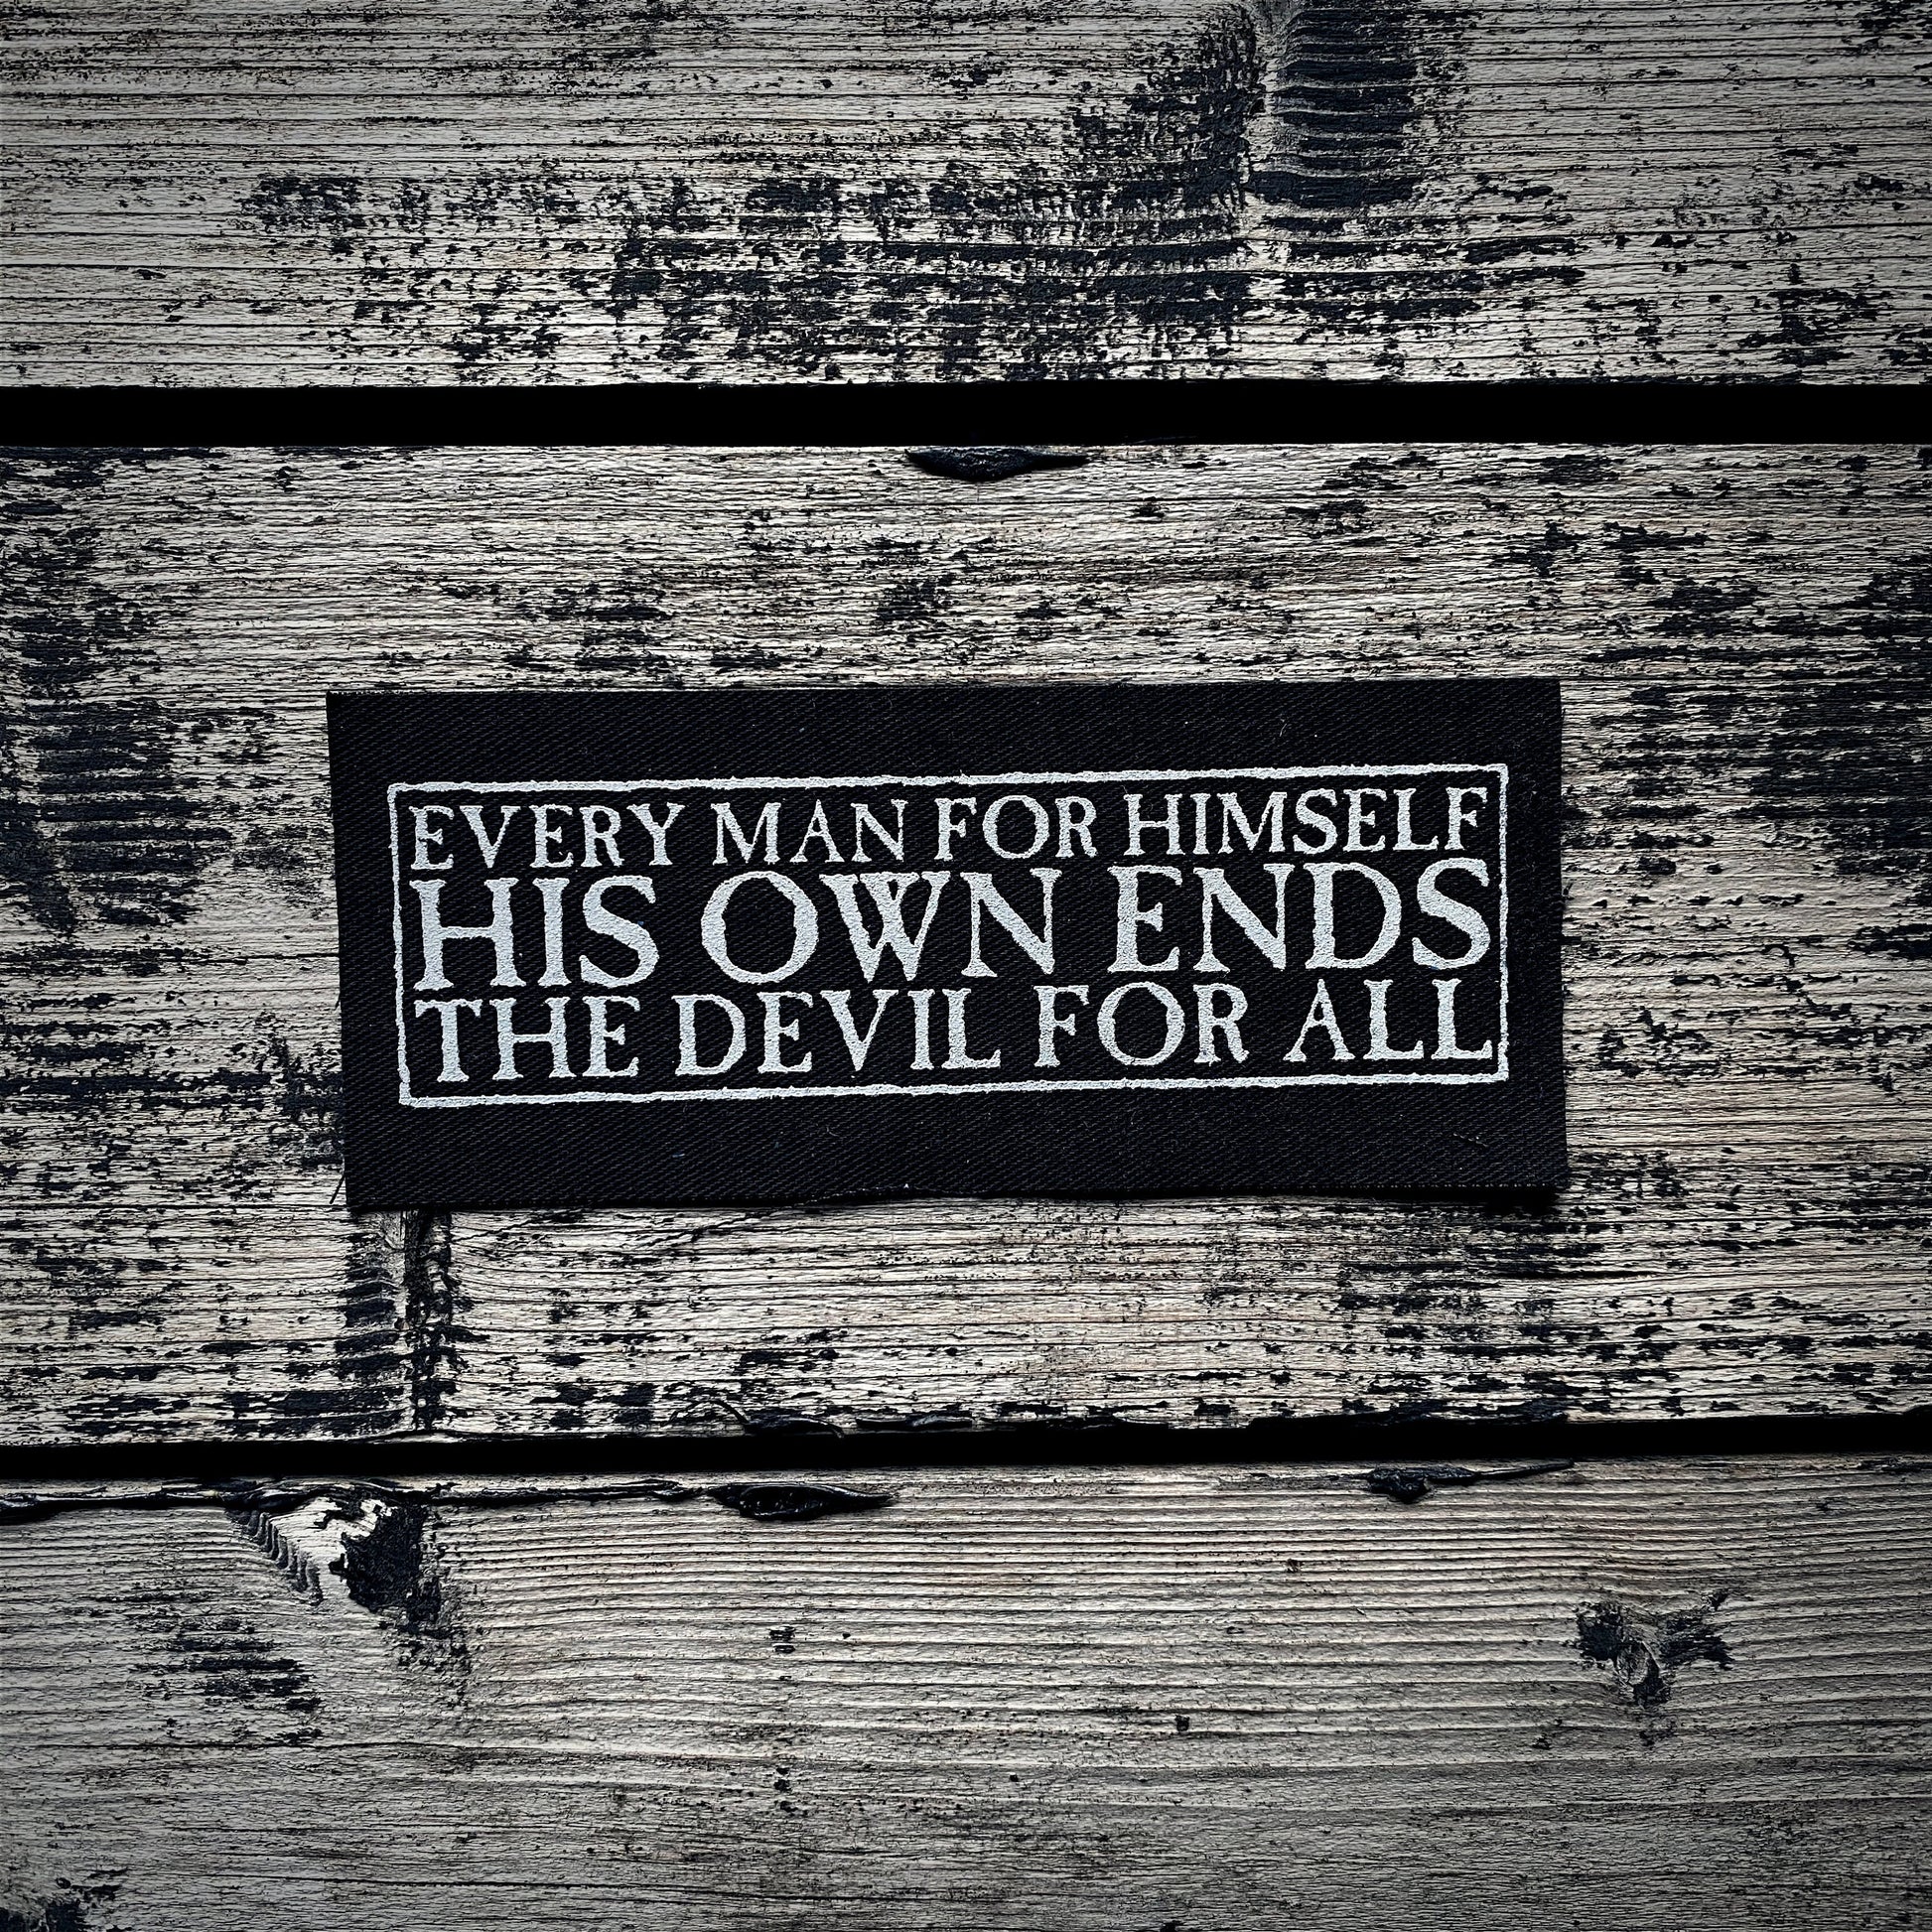 Every man for himself, his own ends, the devil for all quote - screen printed PATCH